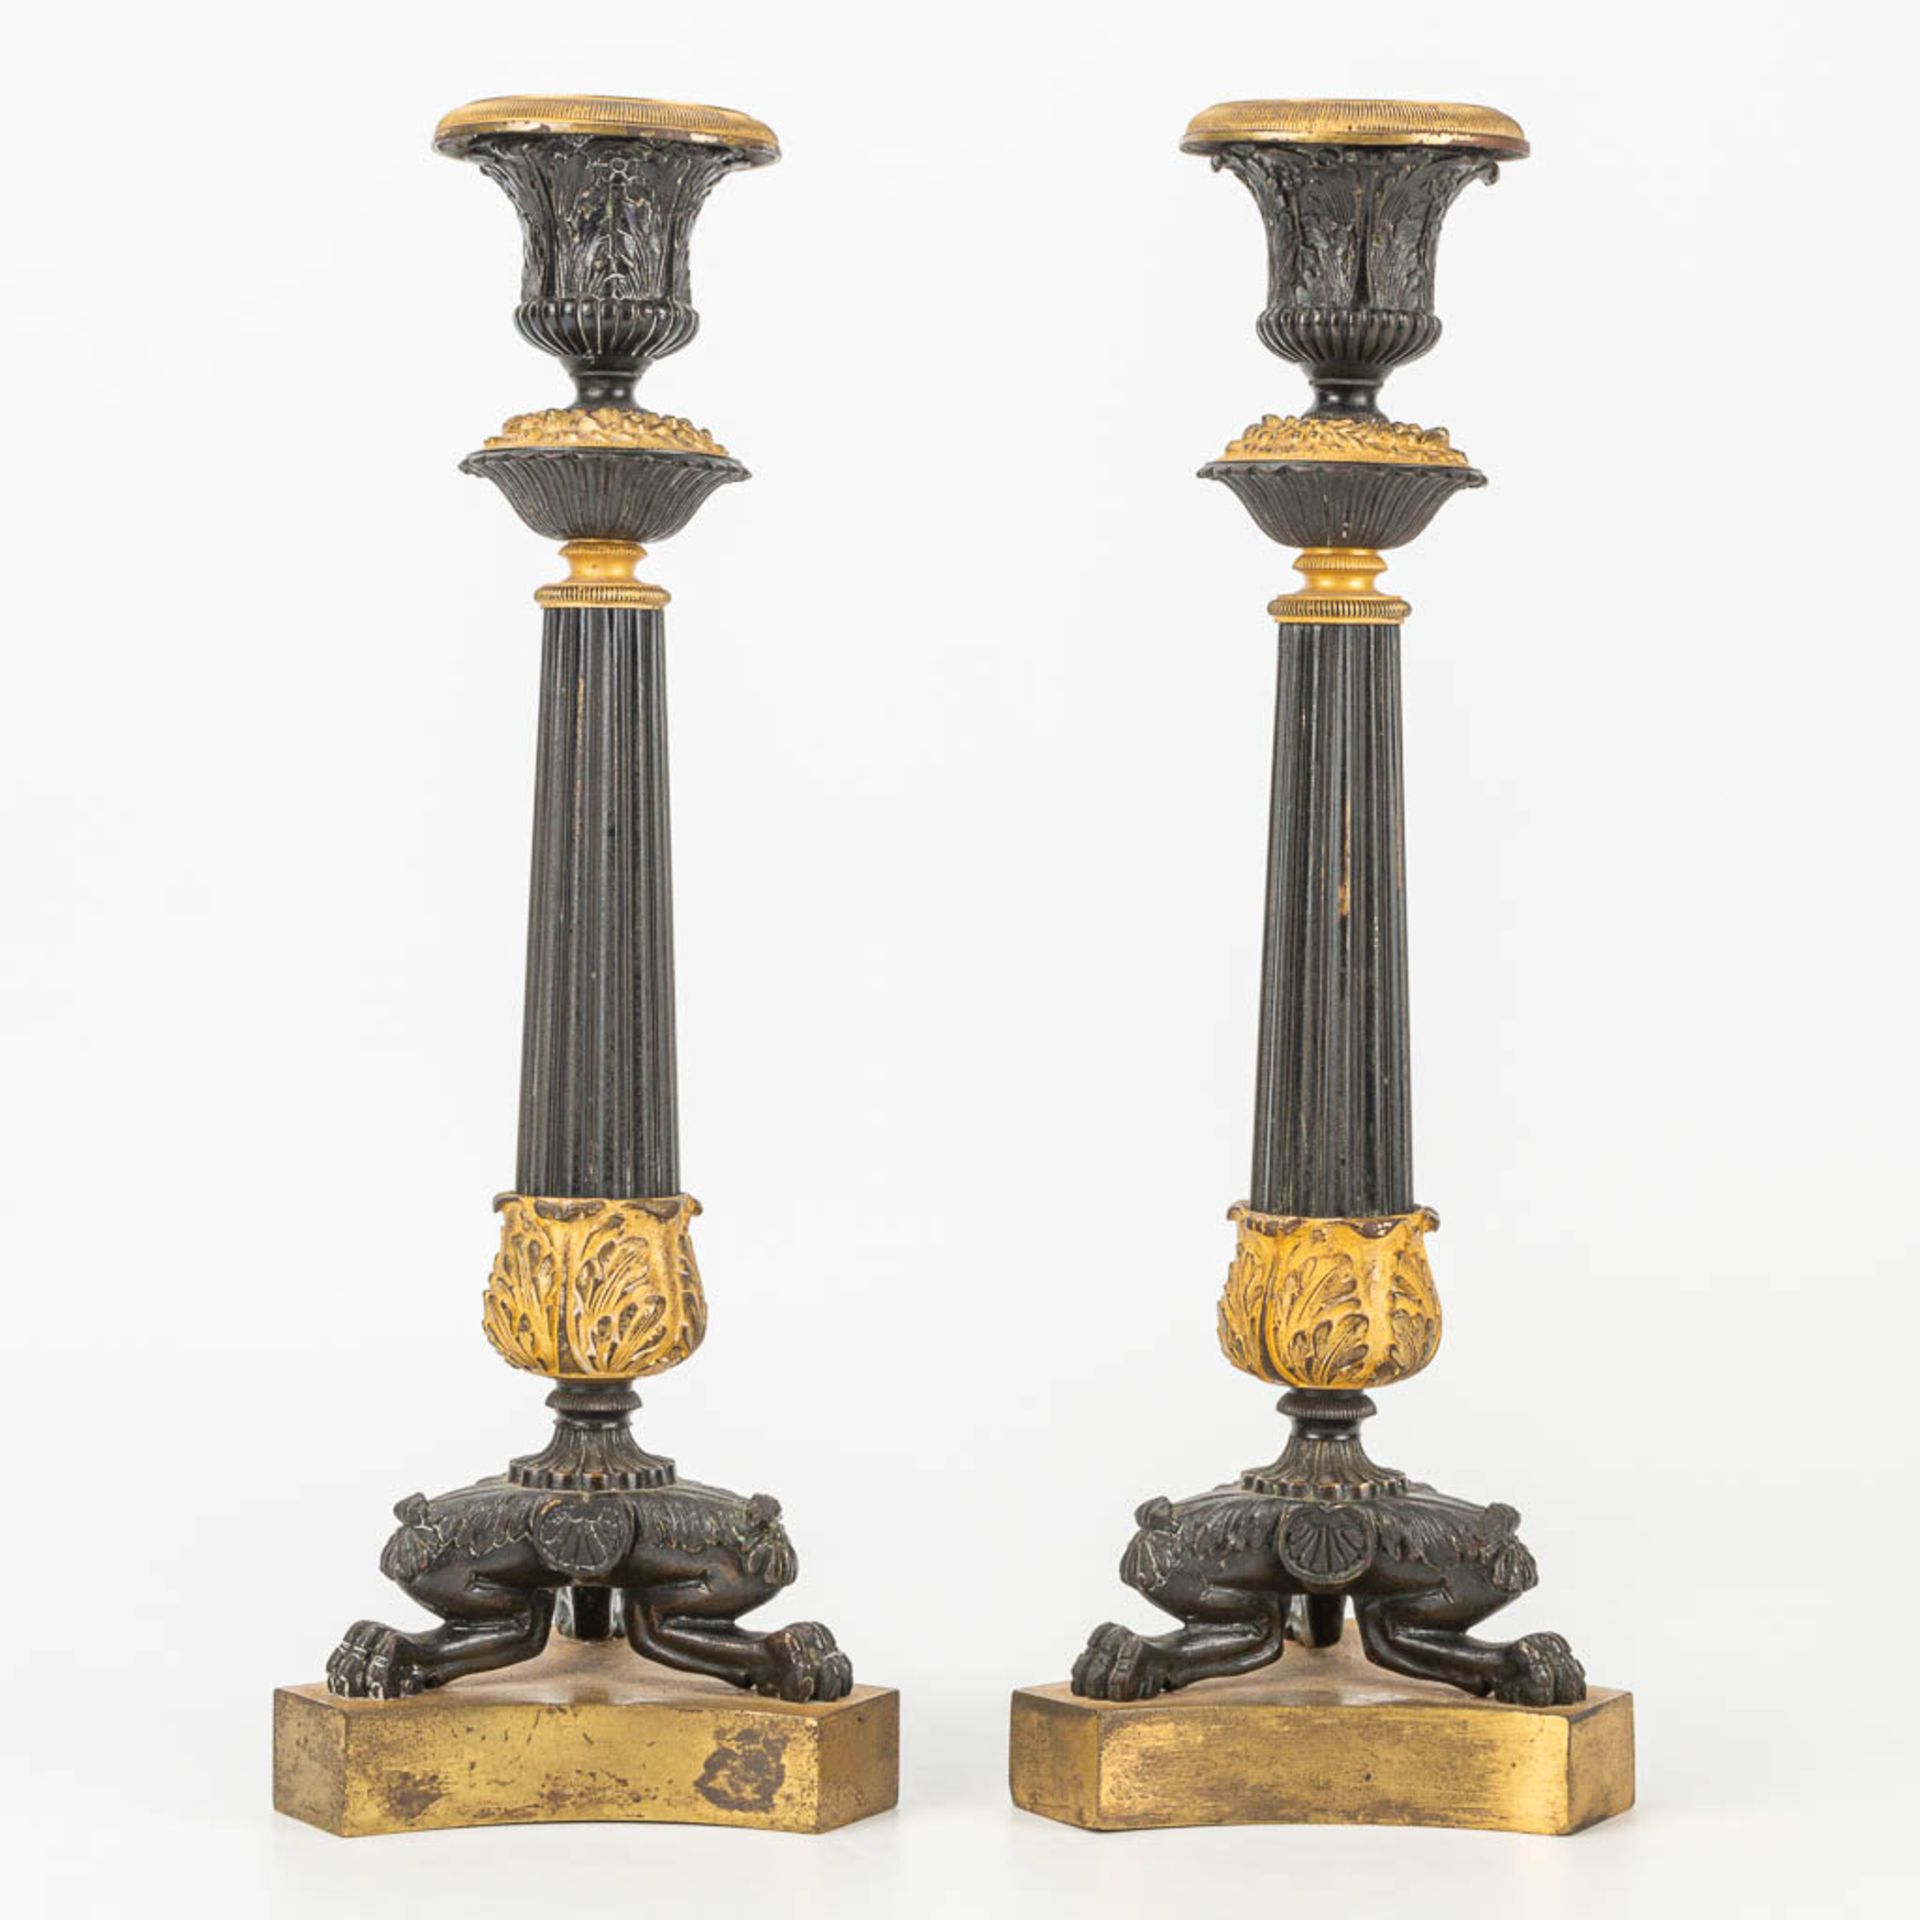 A pair of candlesticks made of gilt and patinated bronze in empire style. - Image 3 of 7